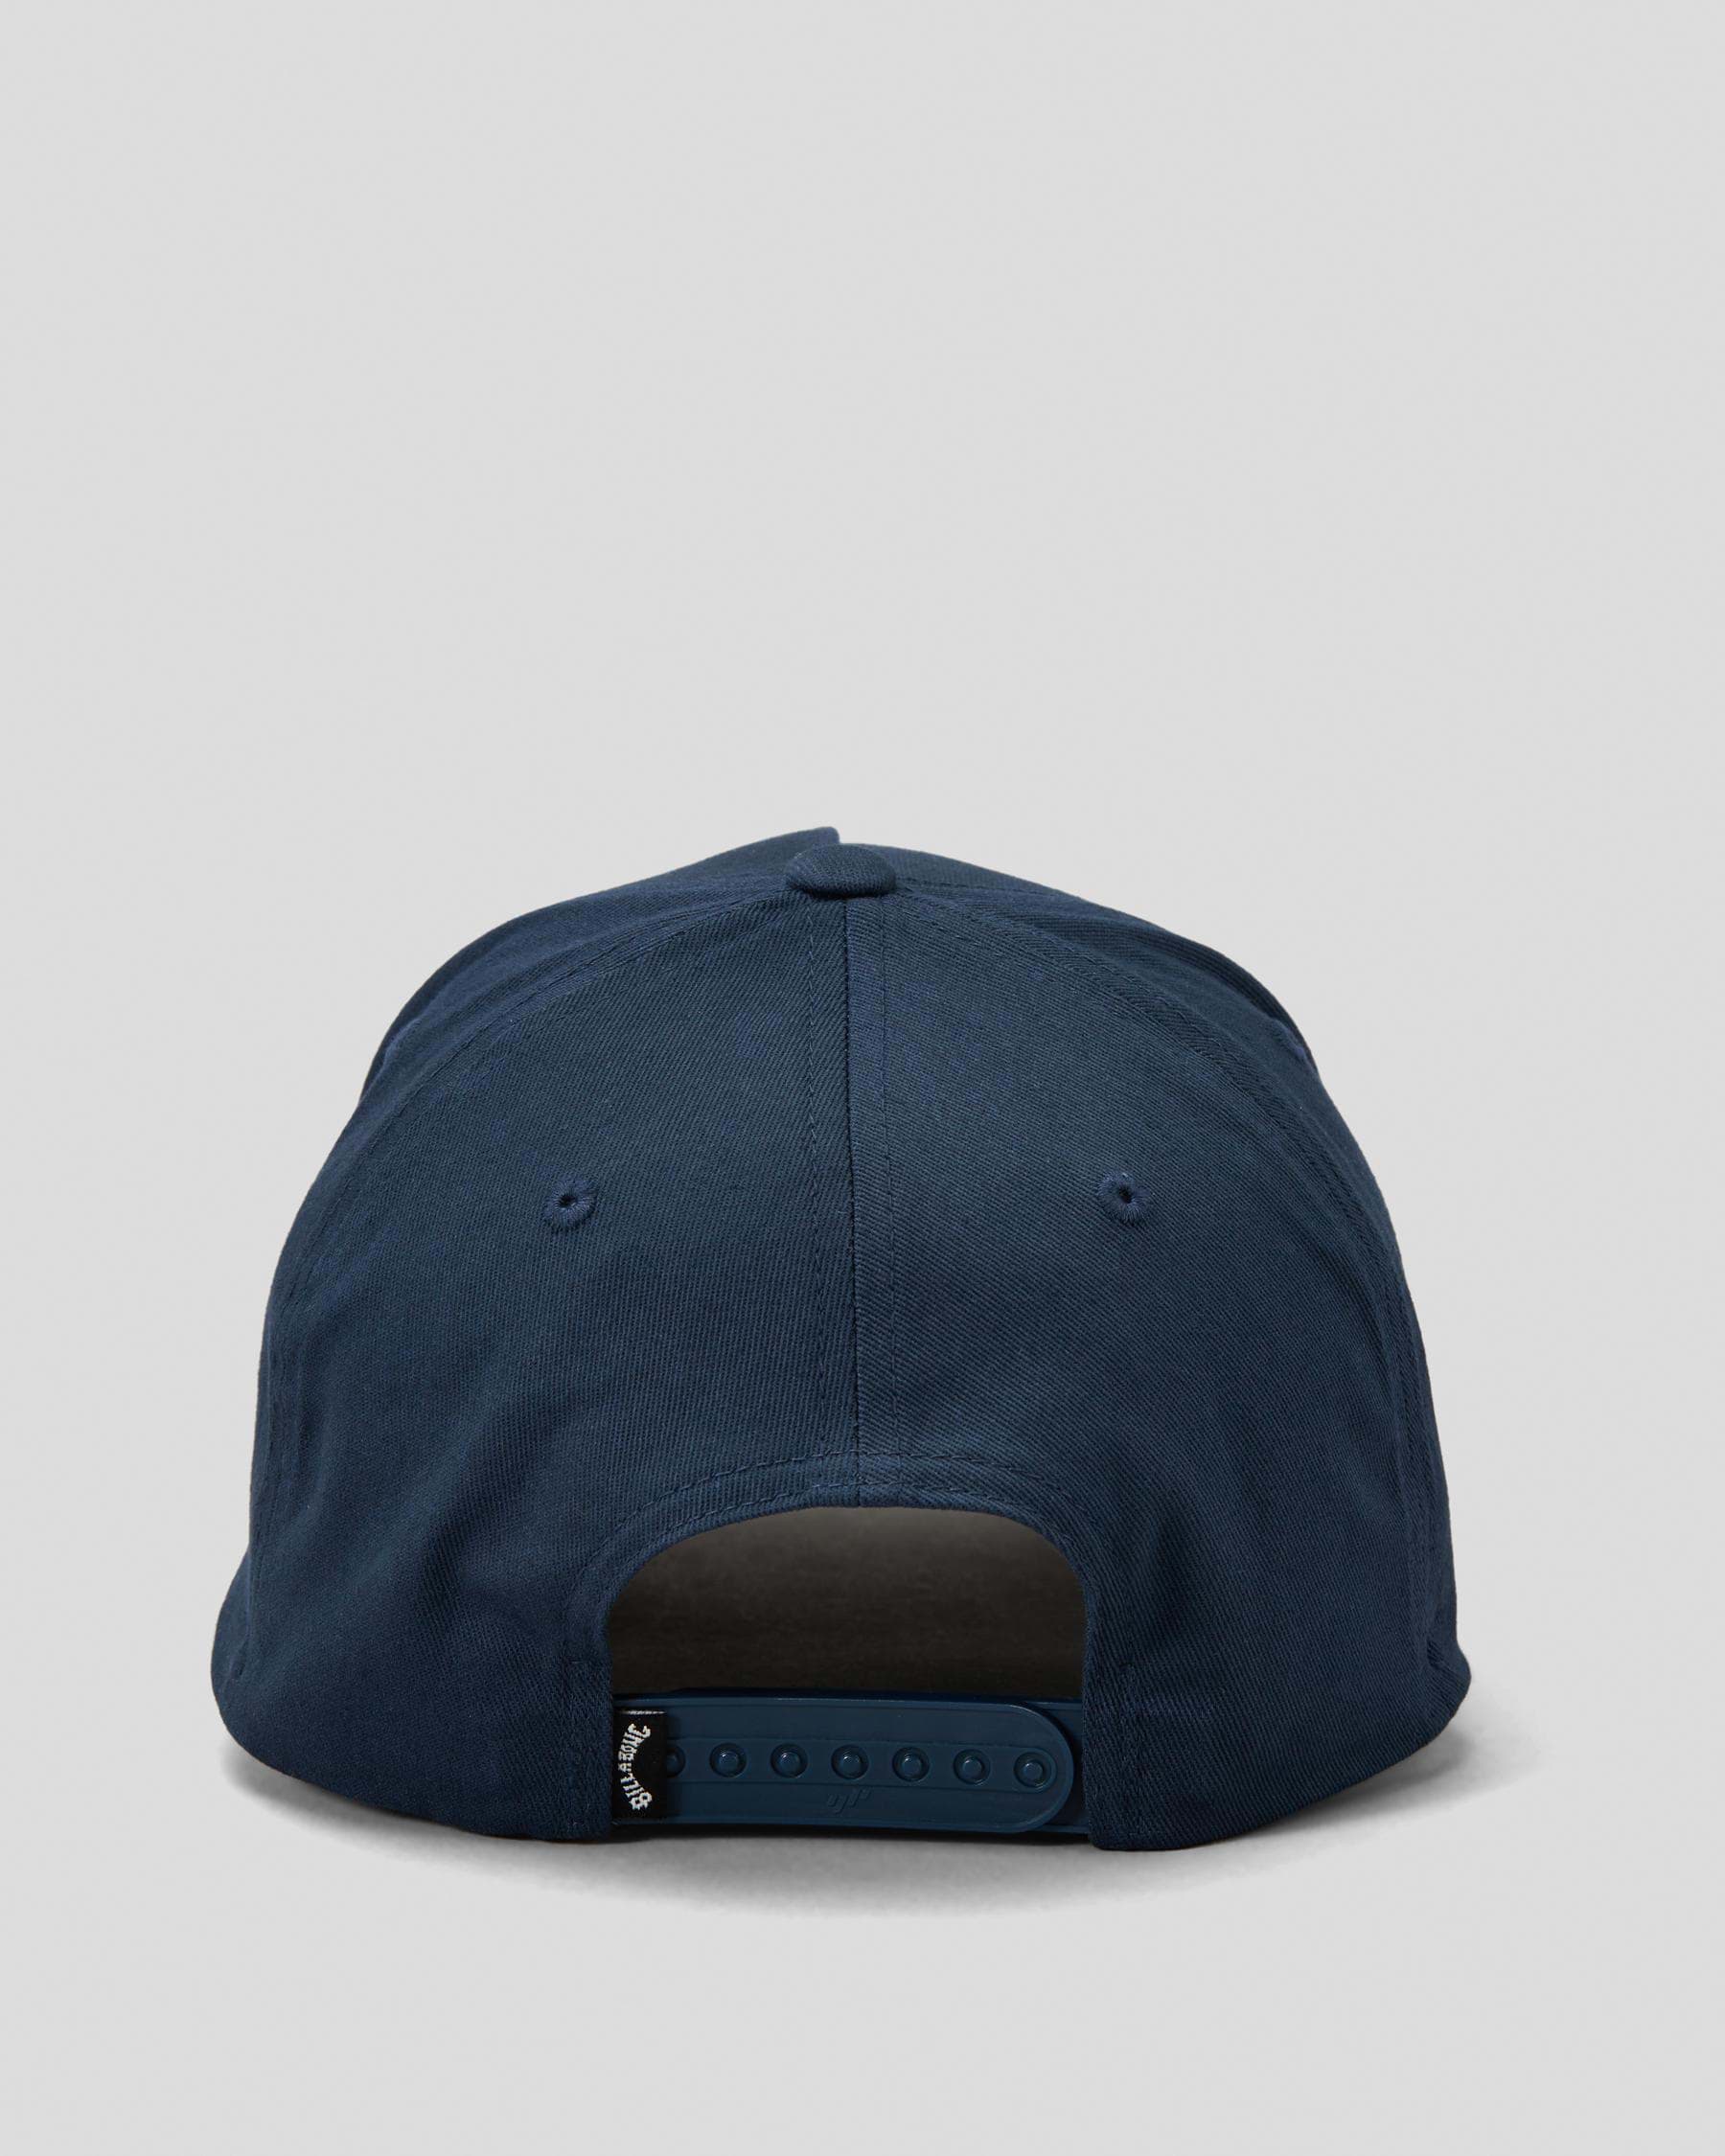 Easy Billabong & Shipping Beach - FREE* Arch - In City 110 Snapback Cap Navy United States Flexfit Returns